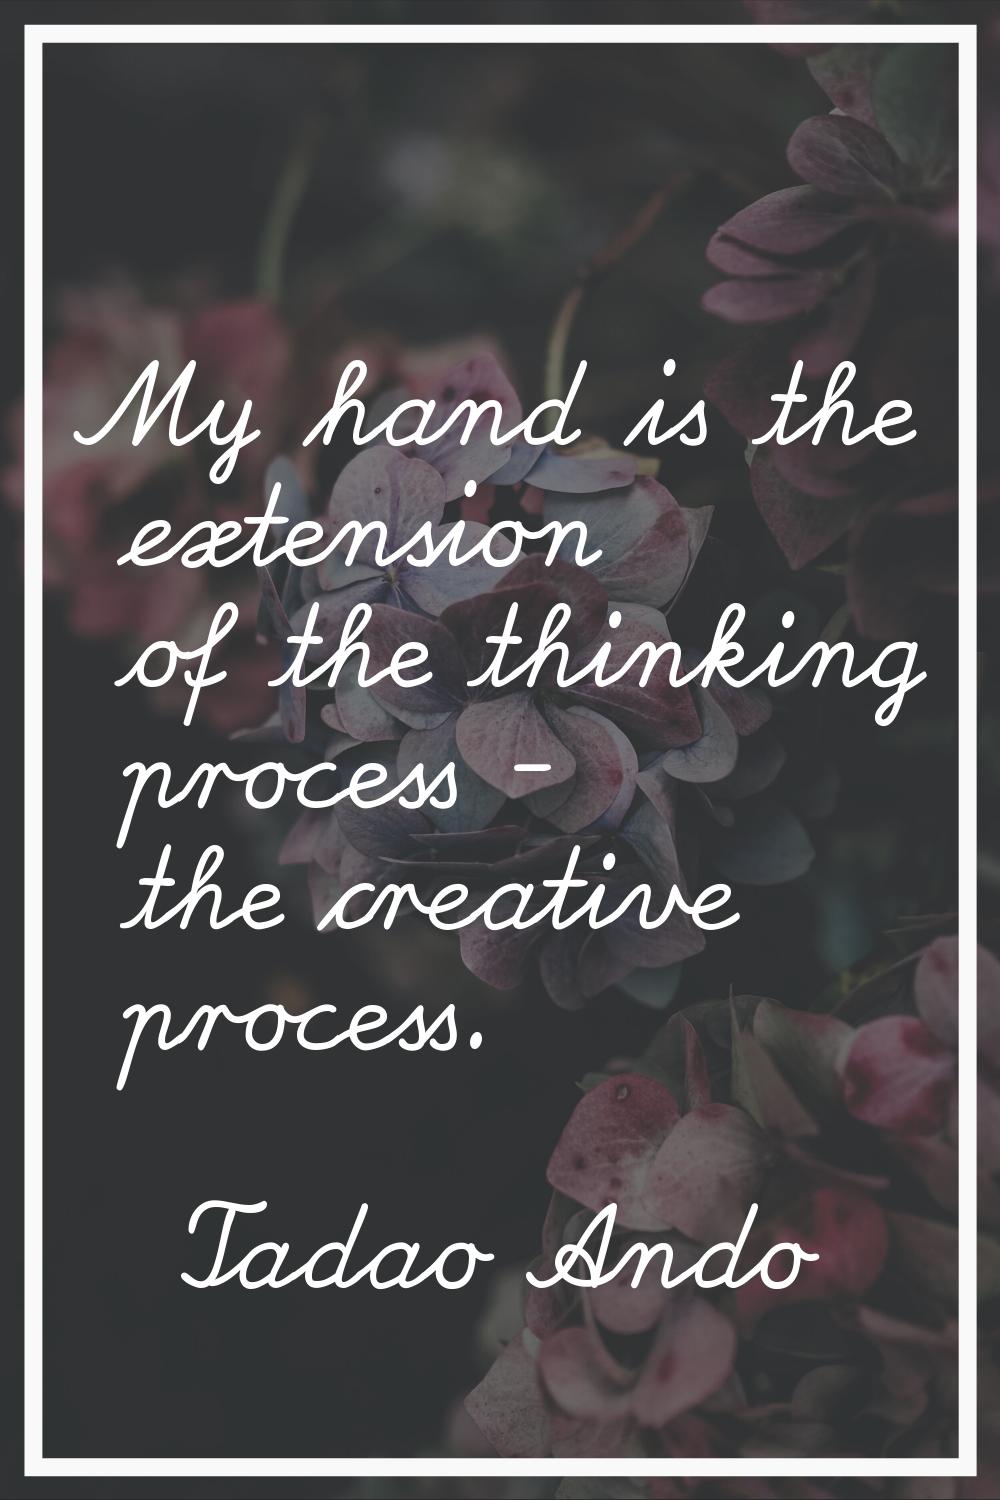 My hand is the extension of the thinking process - the creative process.